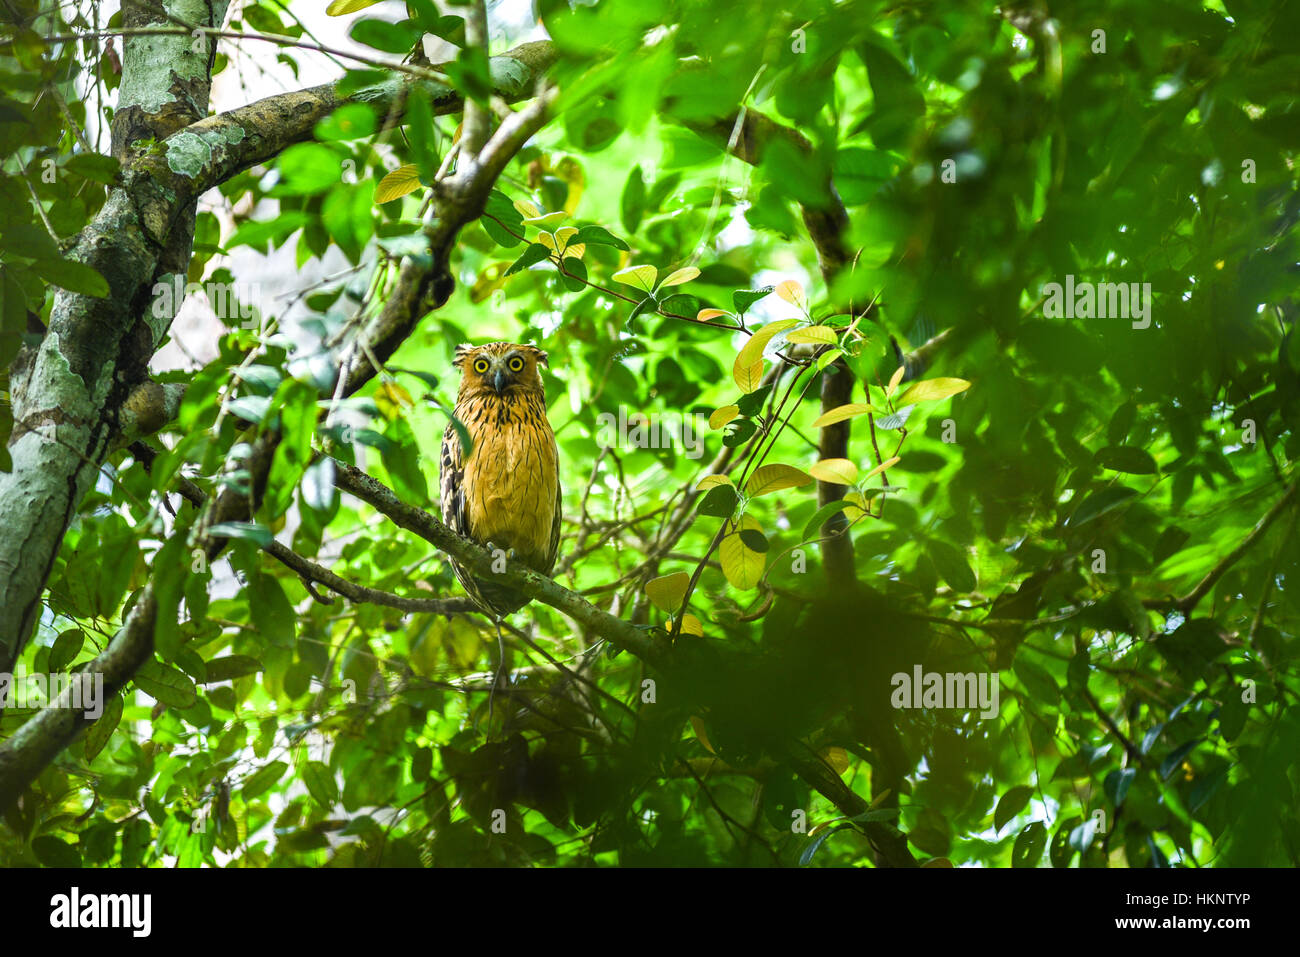 Environmental portrait of a buffy fish-owl in tropical forest. Stock Photo